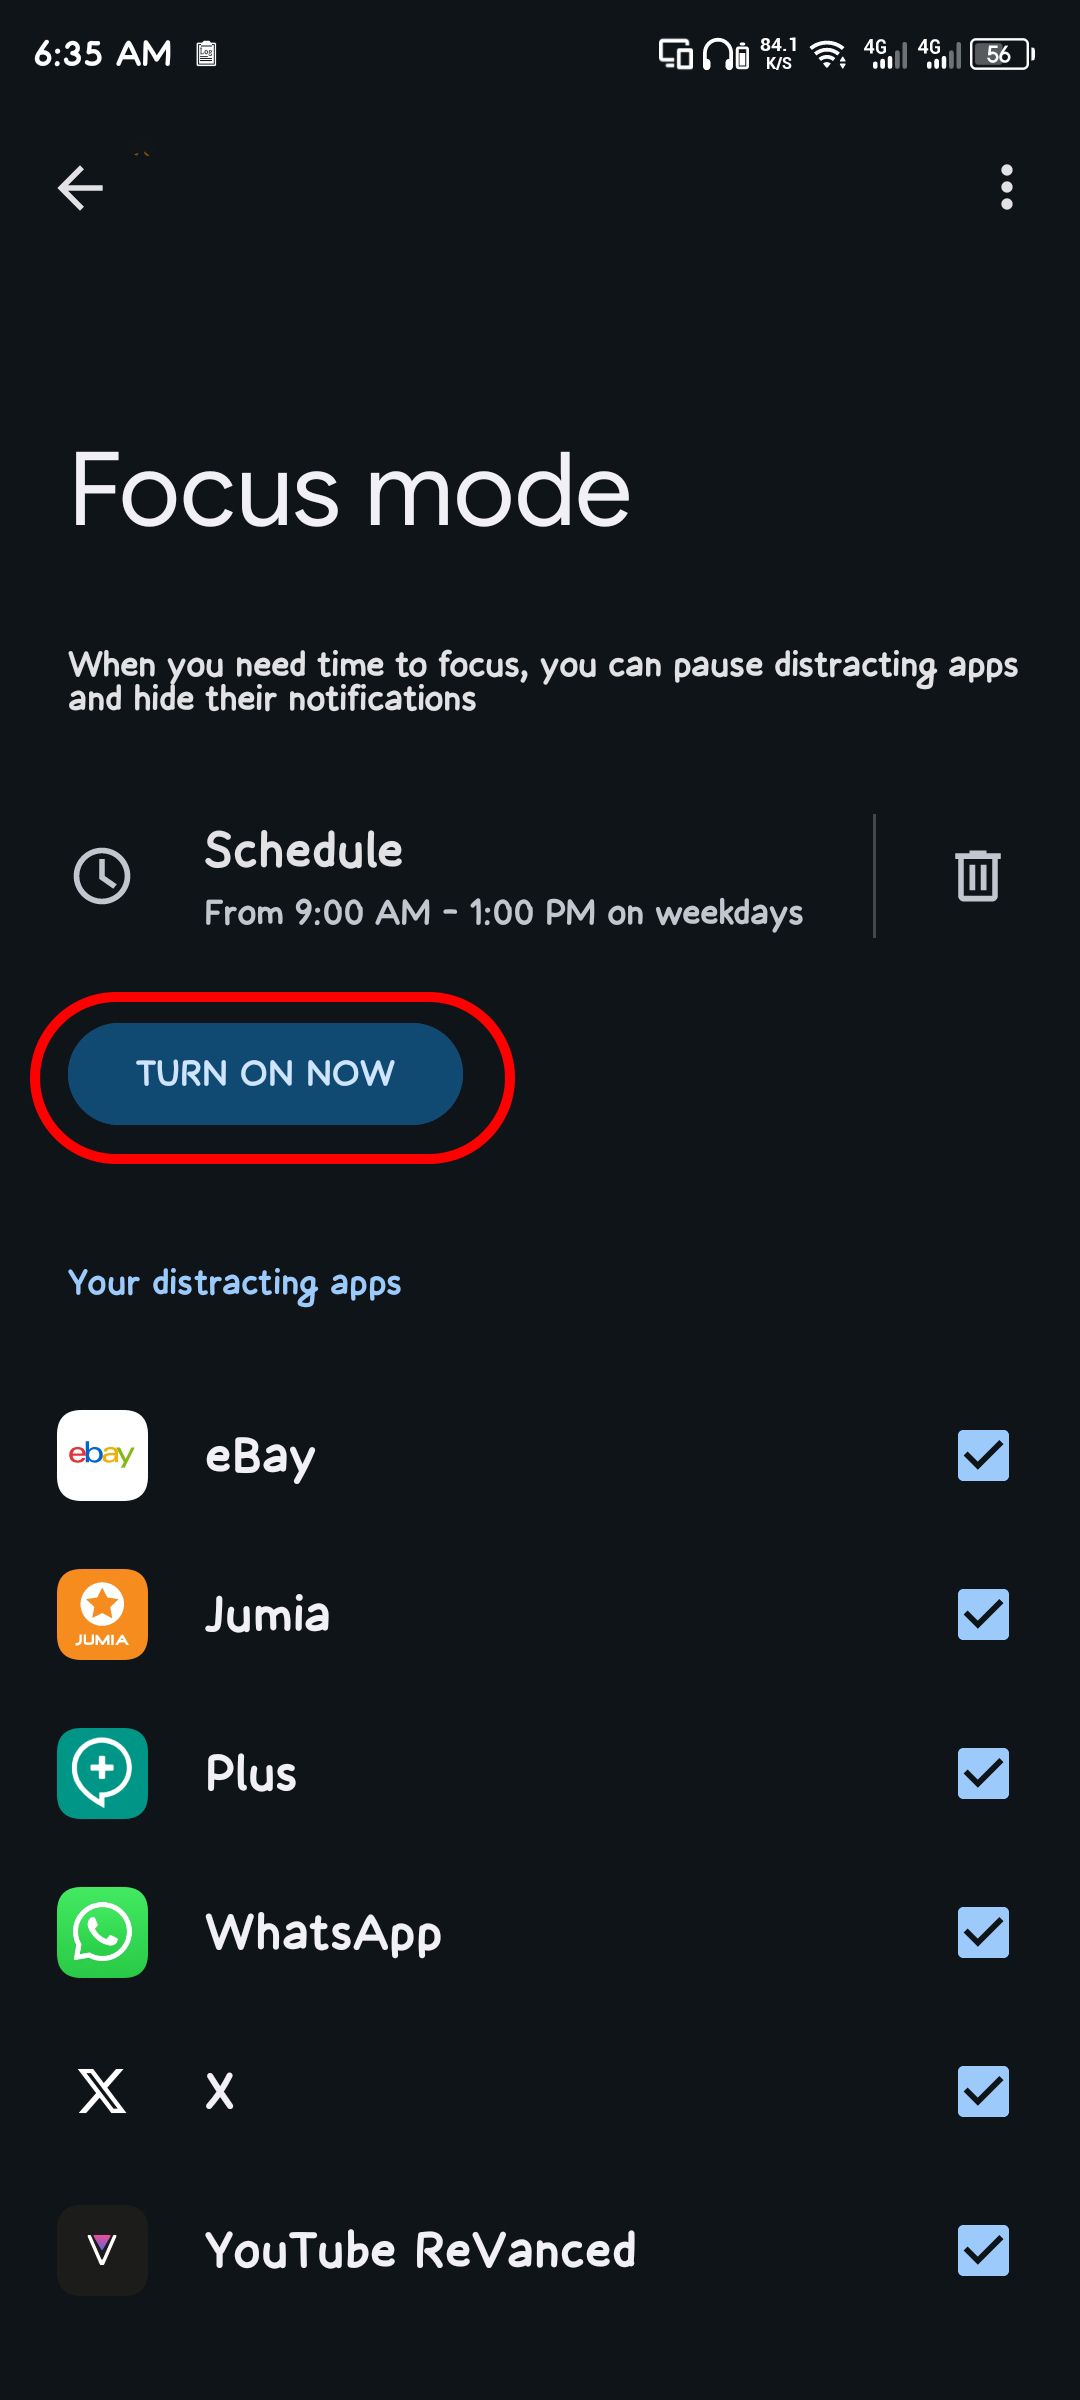 Turning on Focus mode in the Digital Wellbeing app